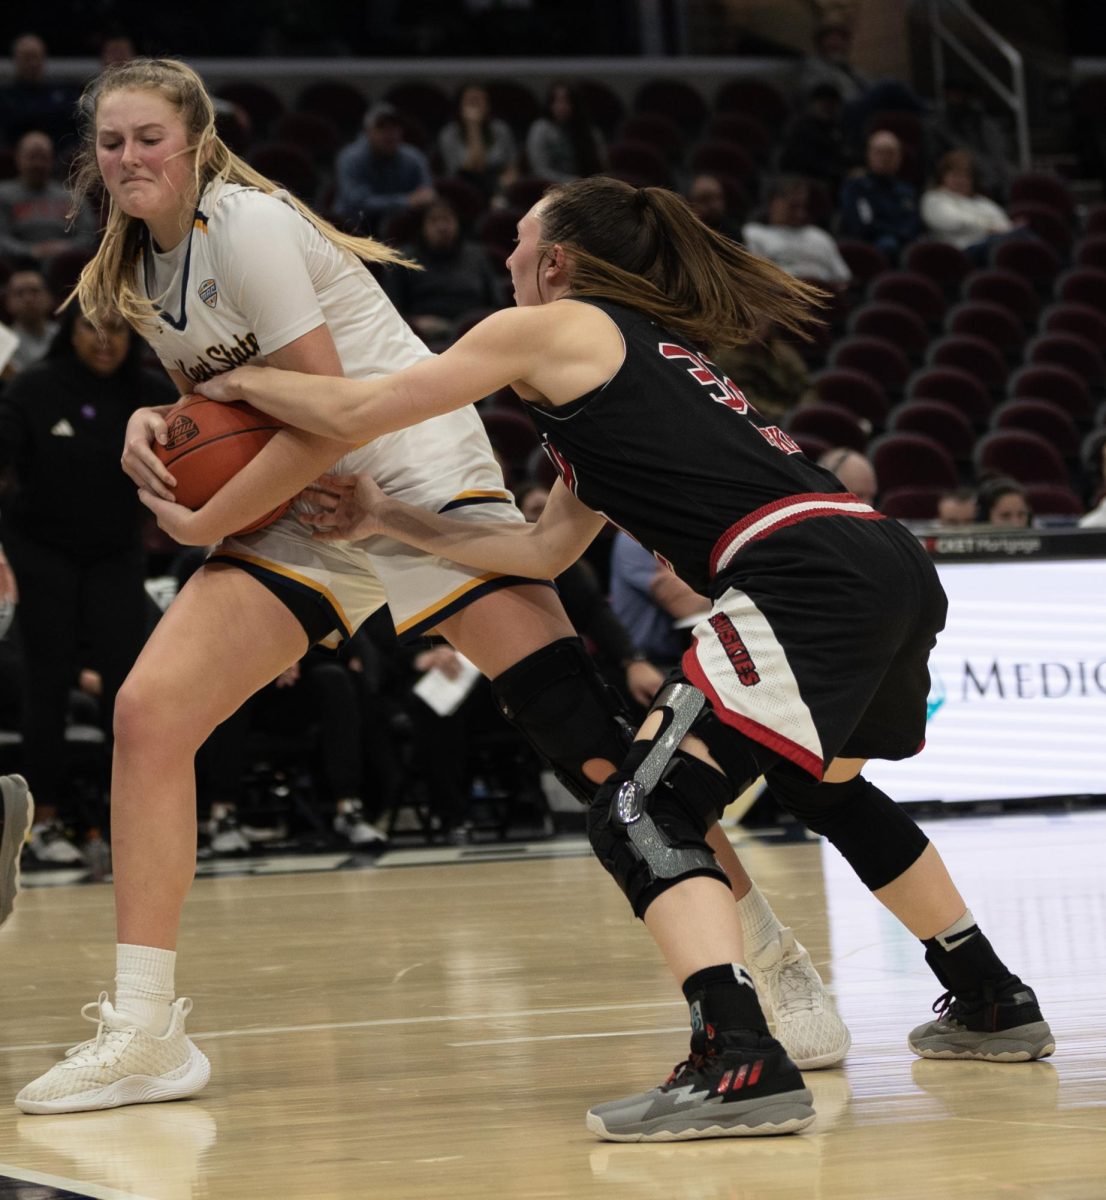 Graduate+Student+Center+Mikala+Morris+pulls+the+ball+away+during+a+tie-up+from+Northern+Illinois+Laura+Nickel+during+their+Mid-American+Conference+Quarterfinal+game+on+March+13%2C+2024.